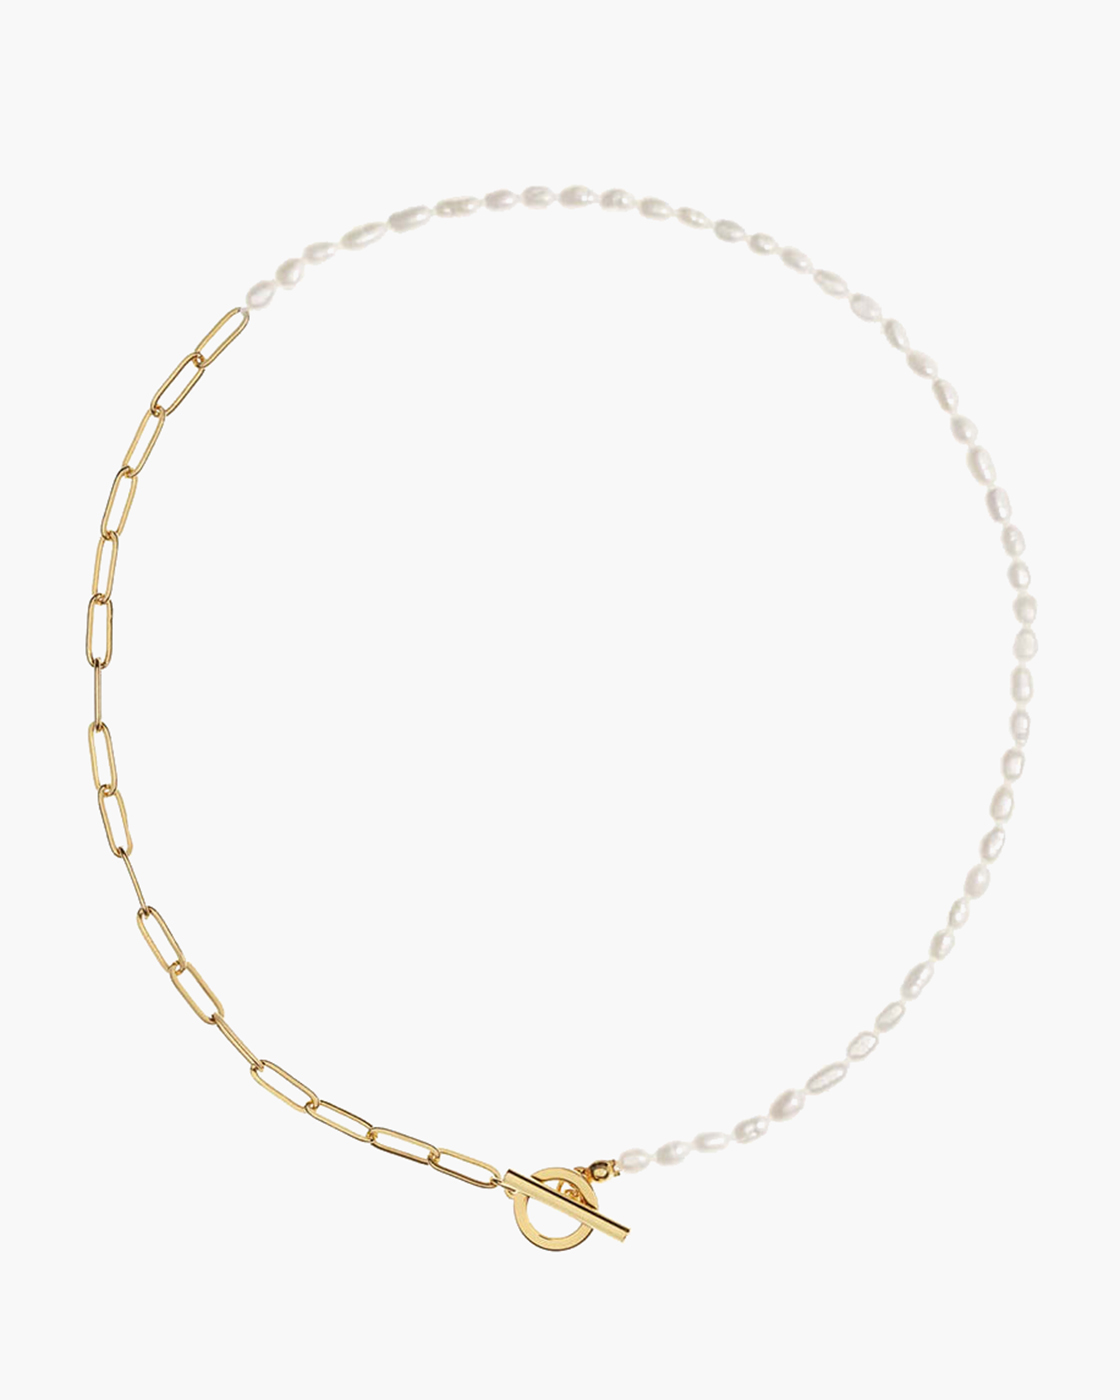 Alba Mixed White Pearl and Gold Chain Necklace